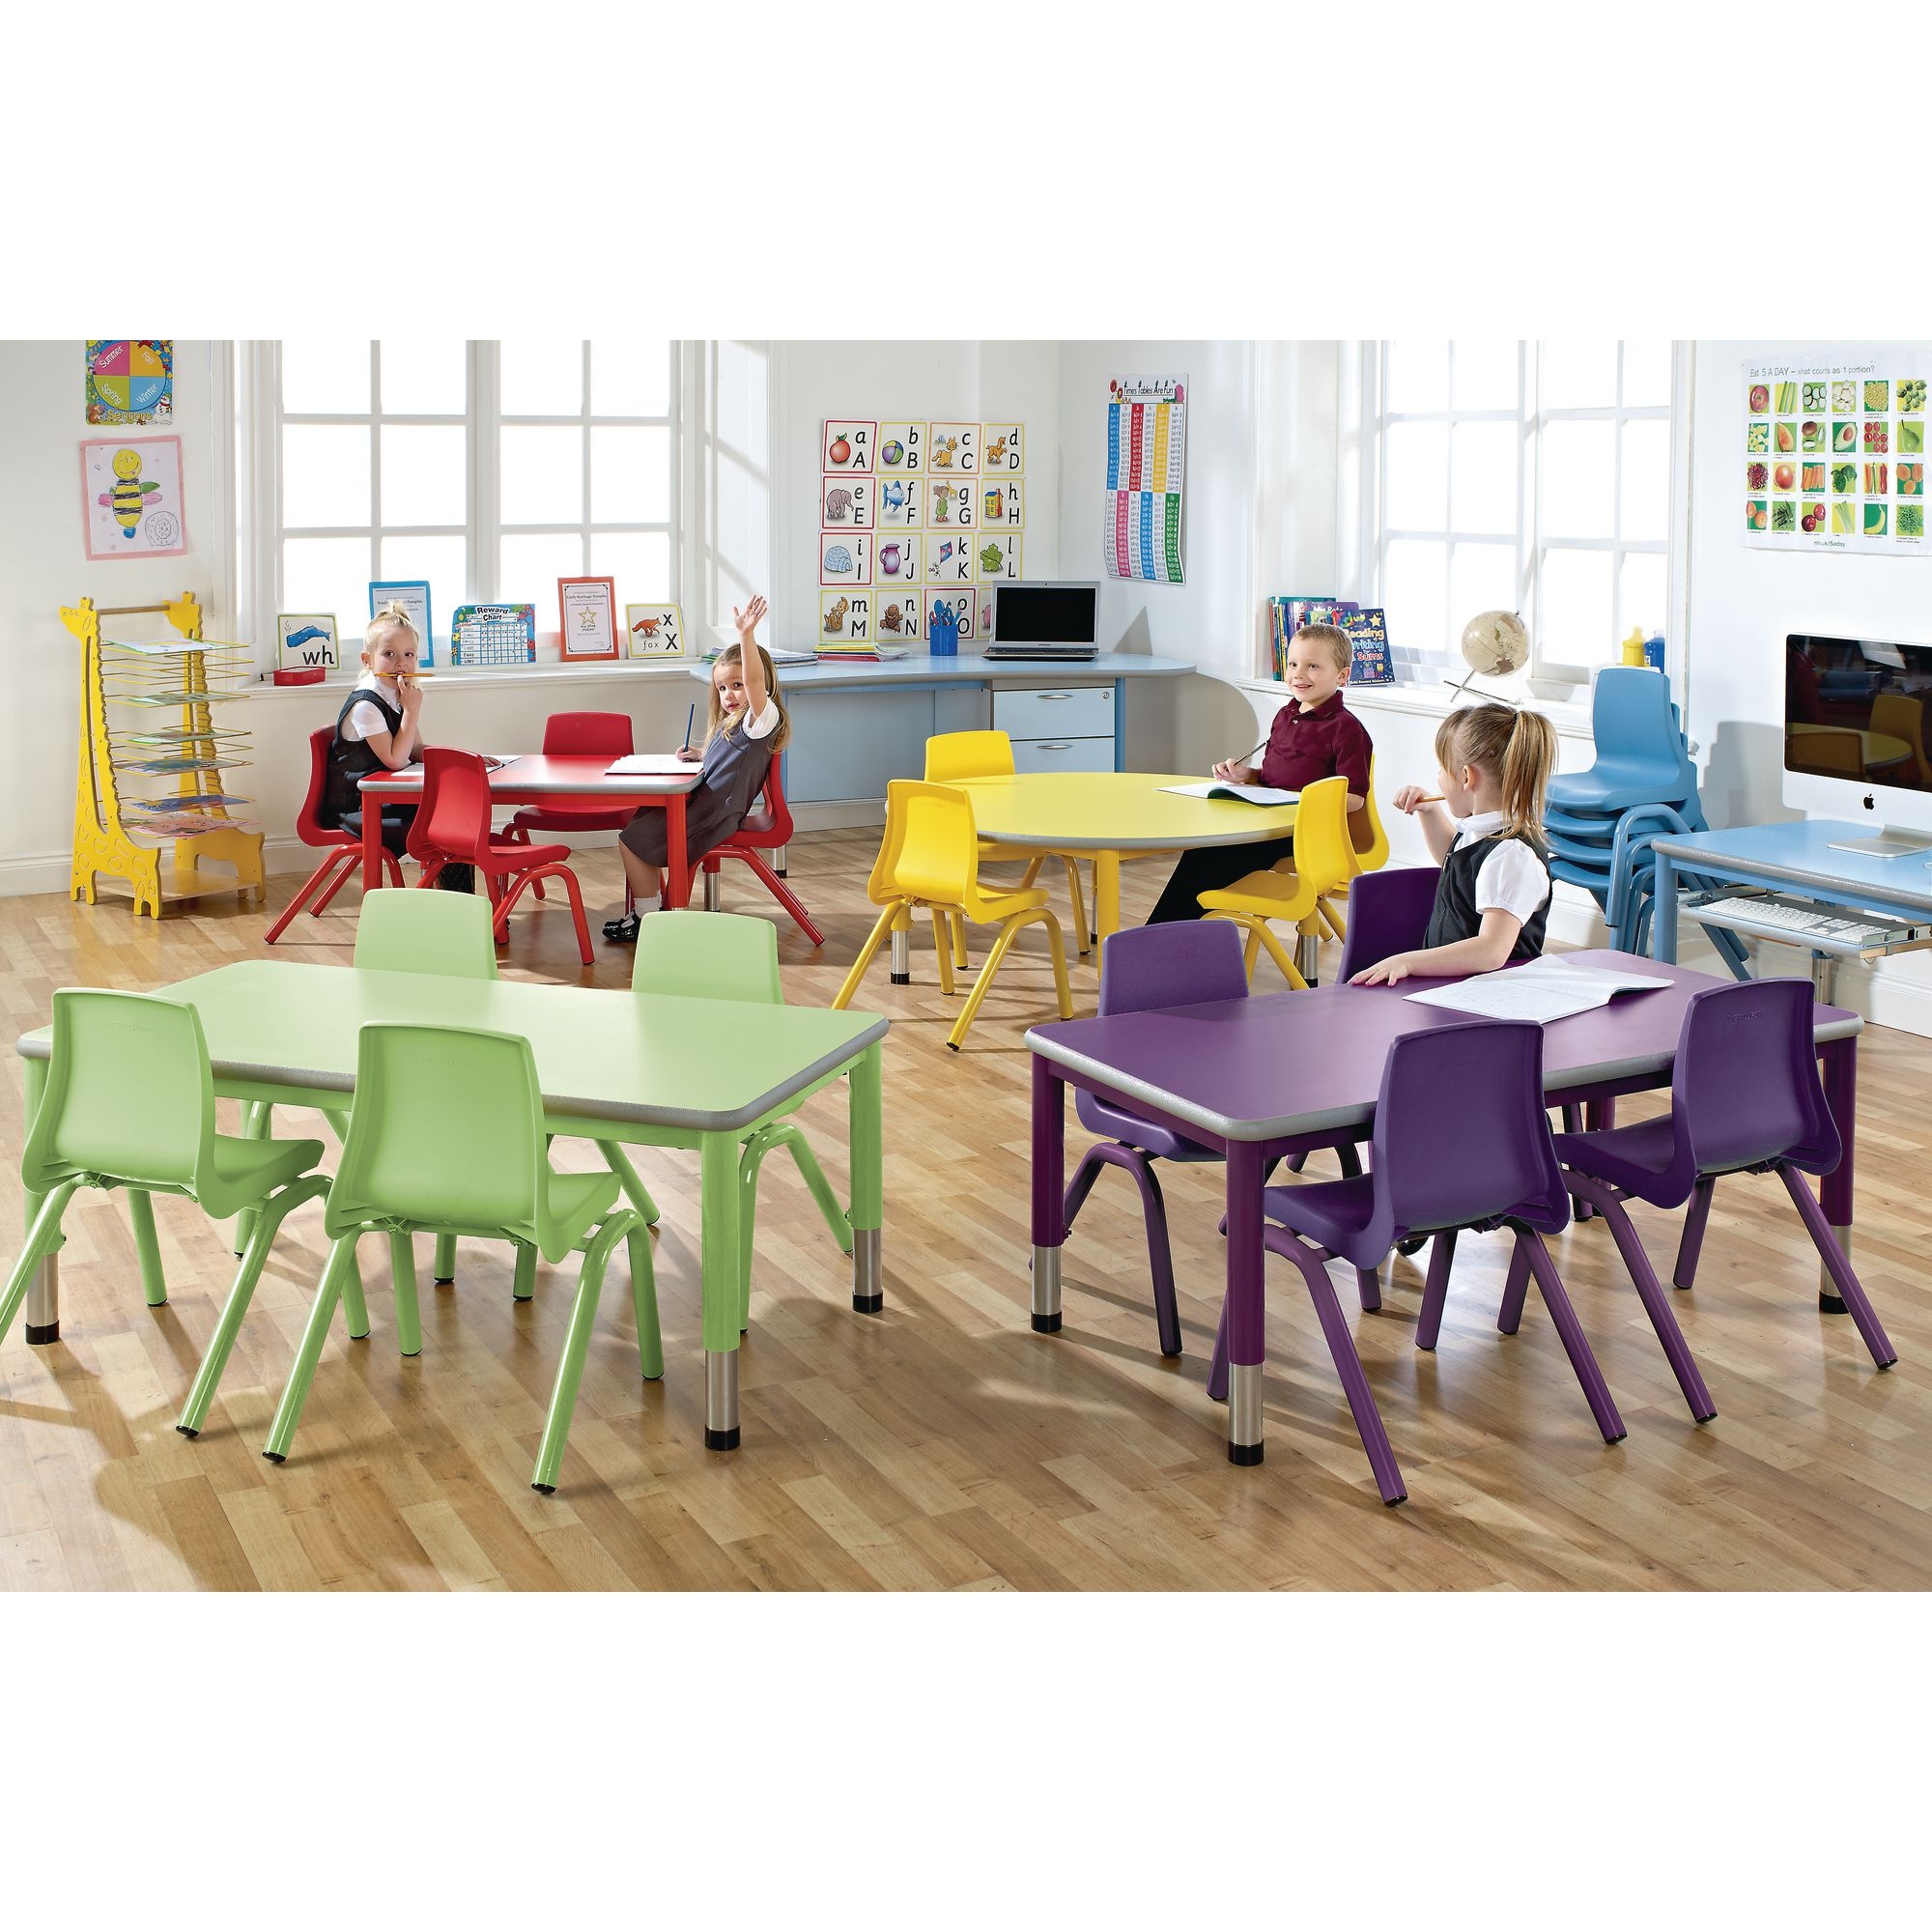 Harlequin Rectangular Height Adjustable Steel Classroom Pack: Table and 4 Chairs - 900 x 600 x 590mm - Soft Blue